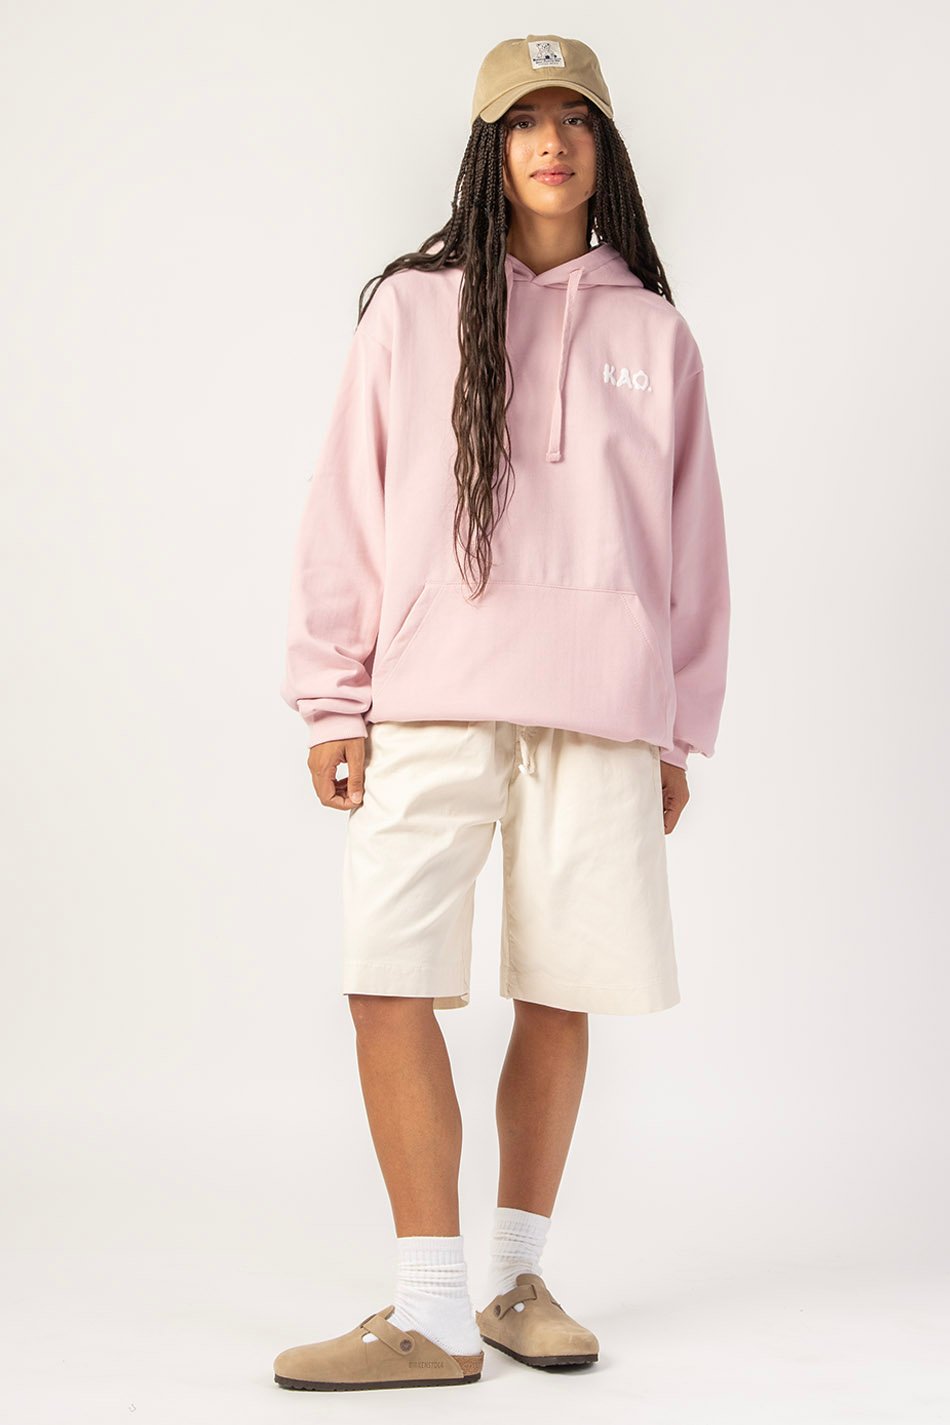 Find Yourself Pink Panther Sweatshirt